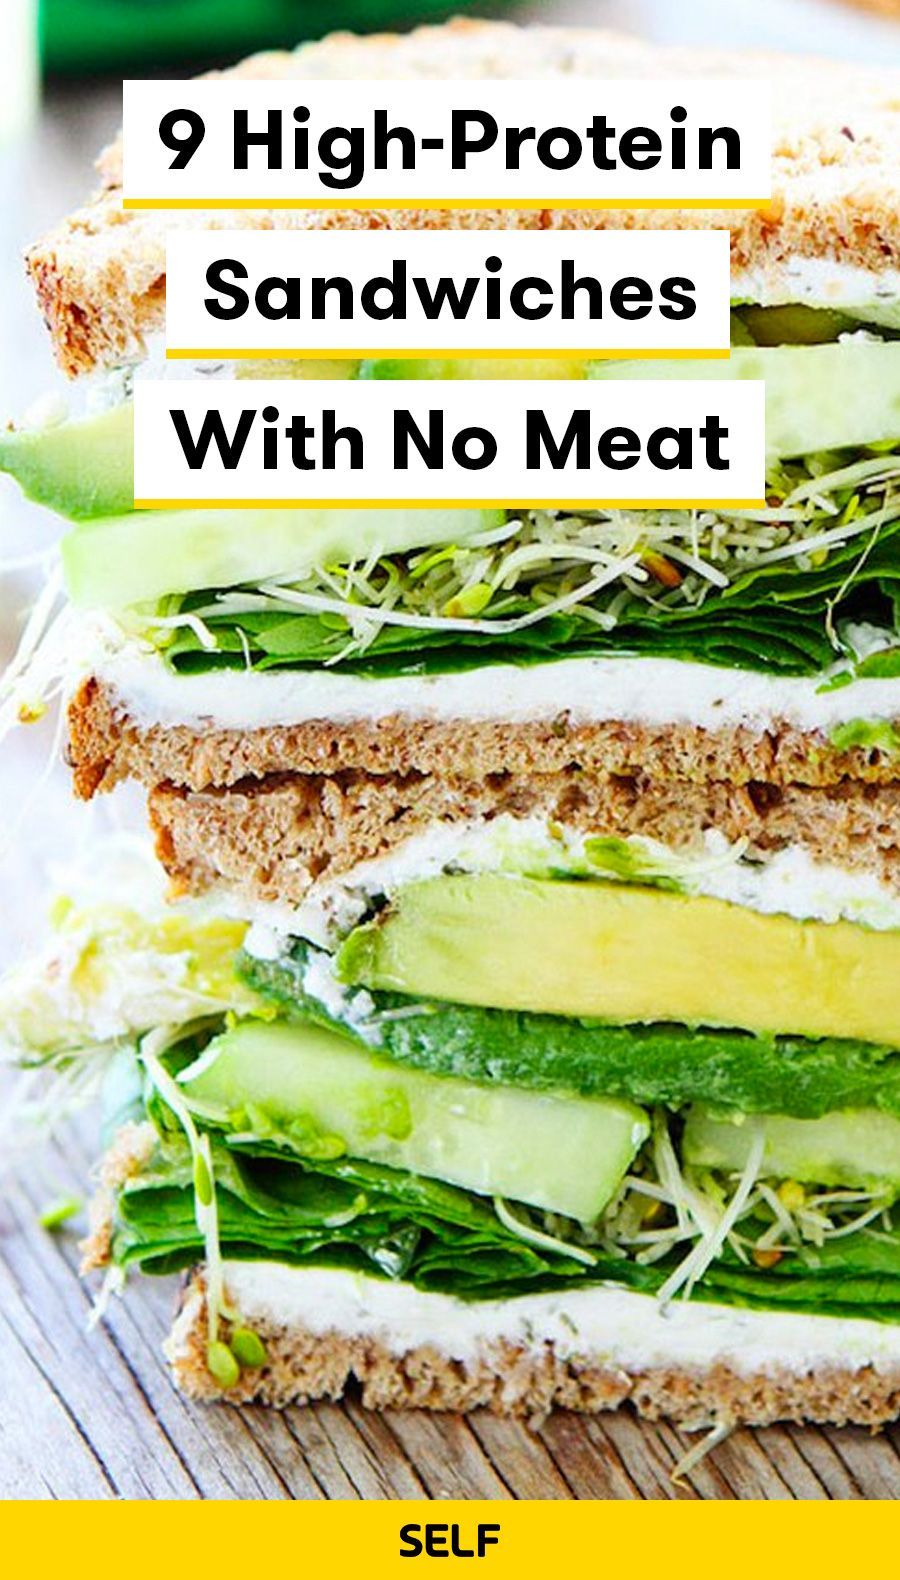 9 High-Protein Sandwiches With No Meat -   18 healthy recipes Vegetarian sandwich ideas